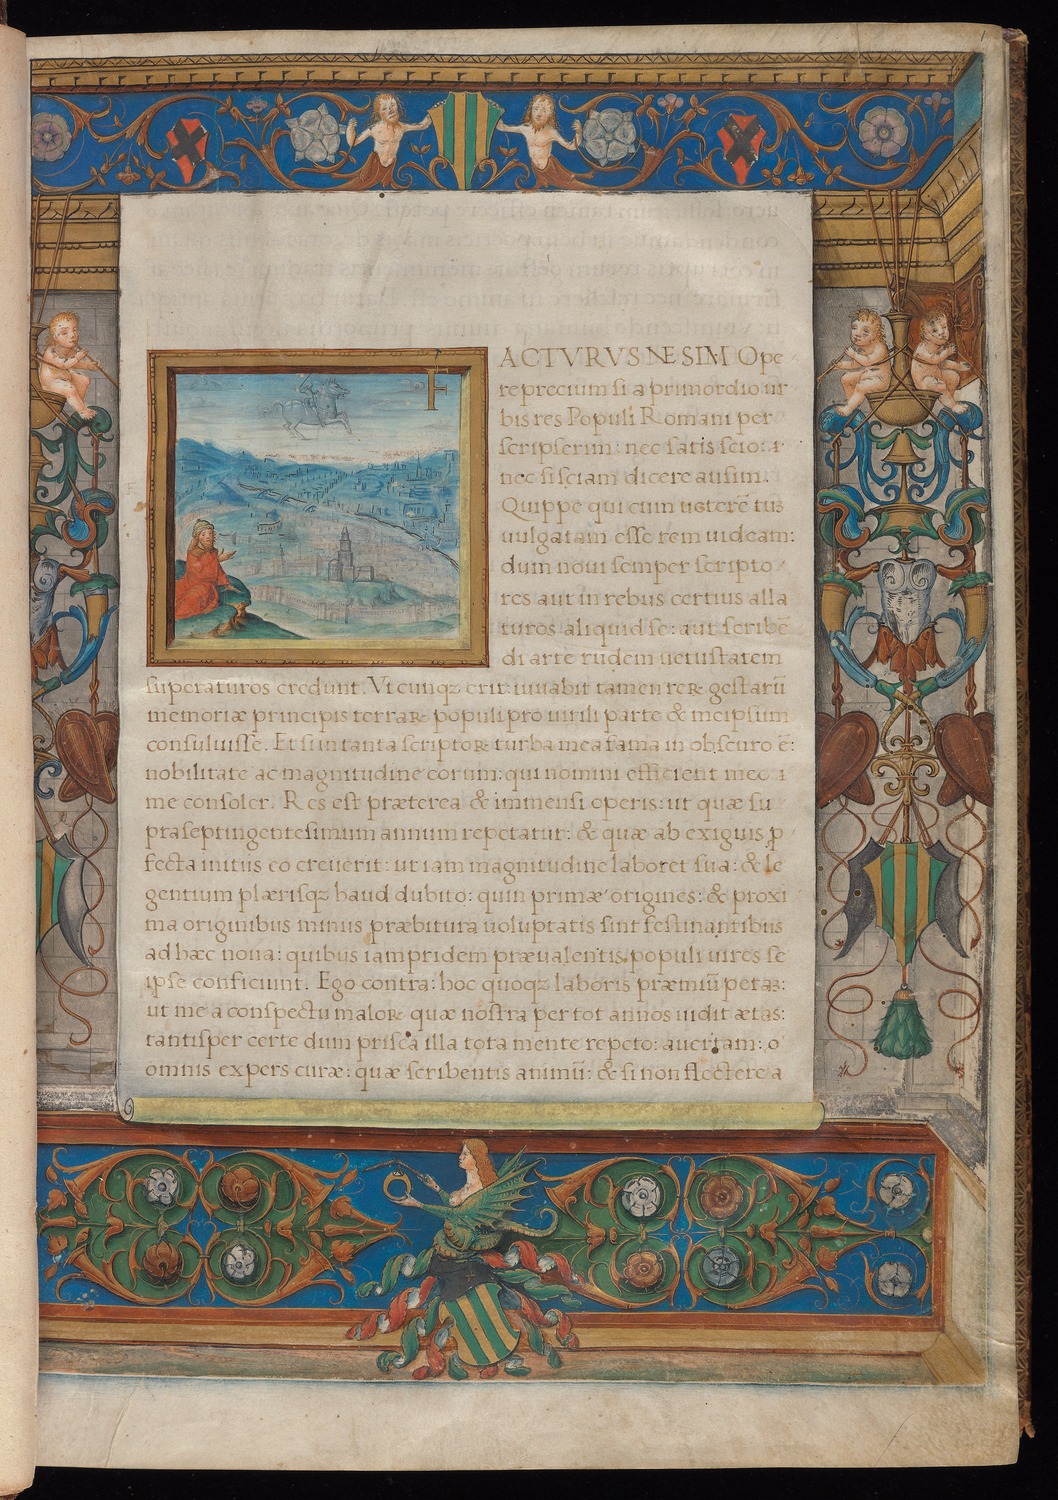 An image of the first folio of this manuscript showing an architectural border and a view of the city of Rome